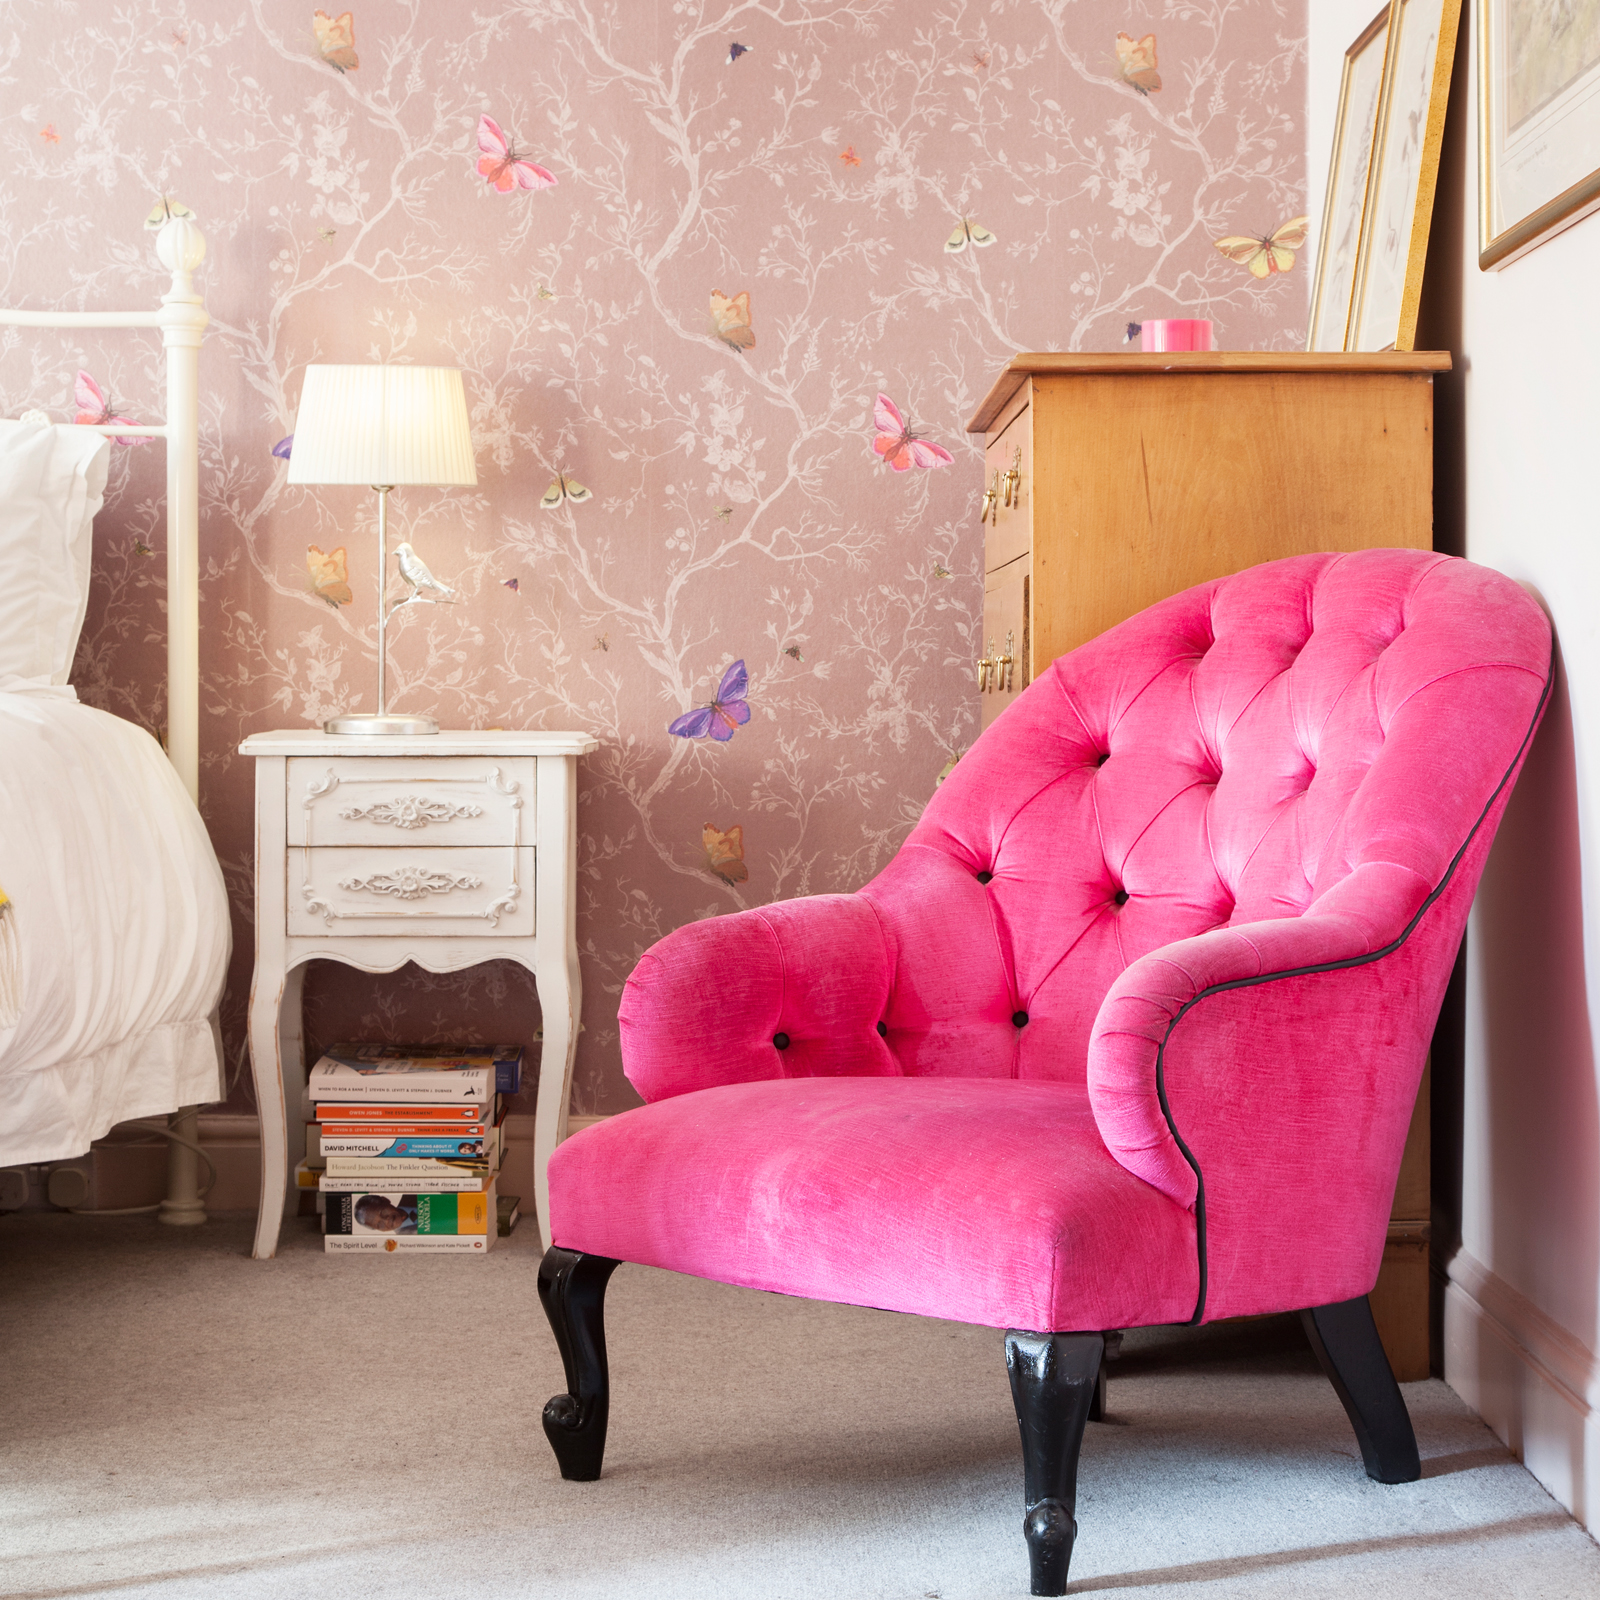 The hot pink armchair from Tann Rokka, bought in the days when weekends really were weekends/Photo: Susie Lowe